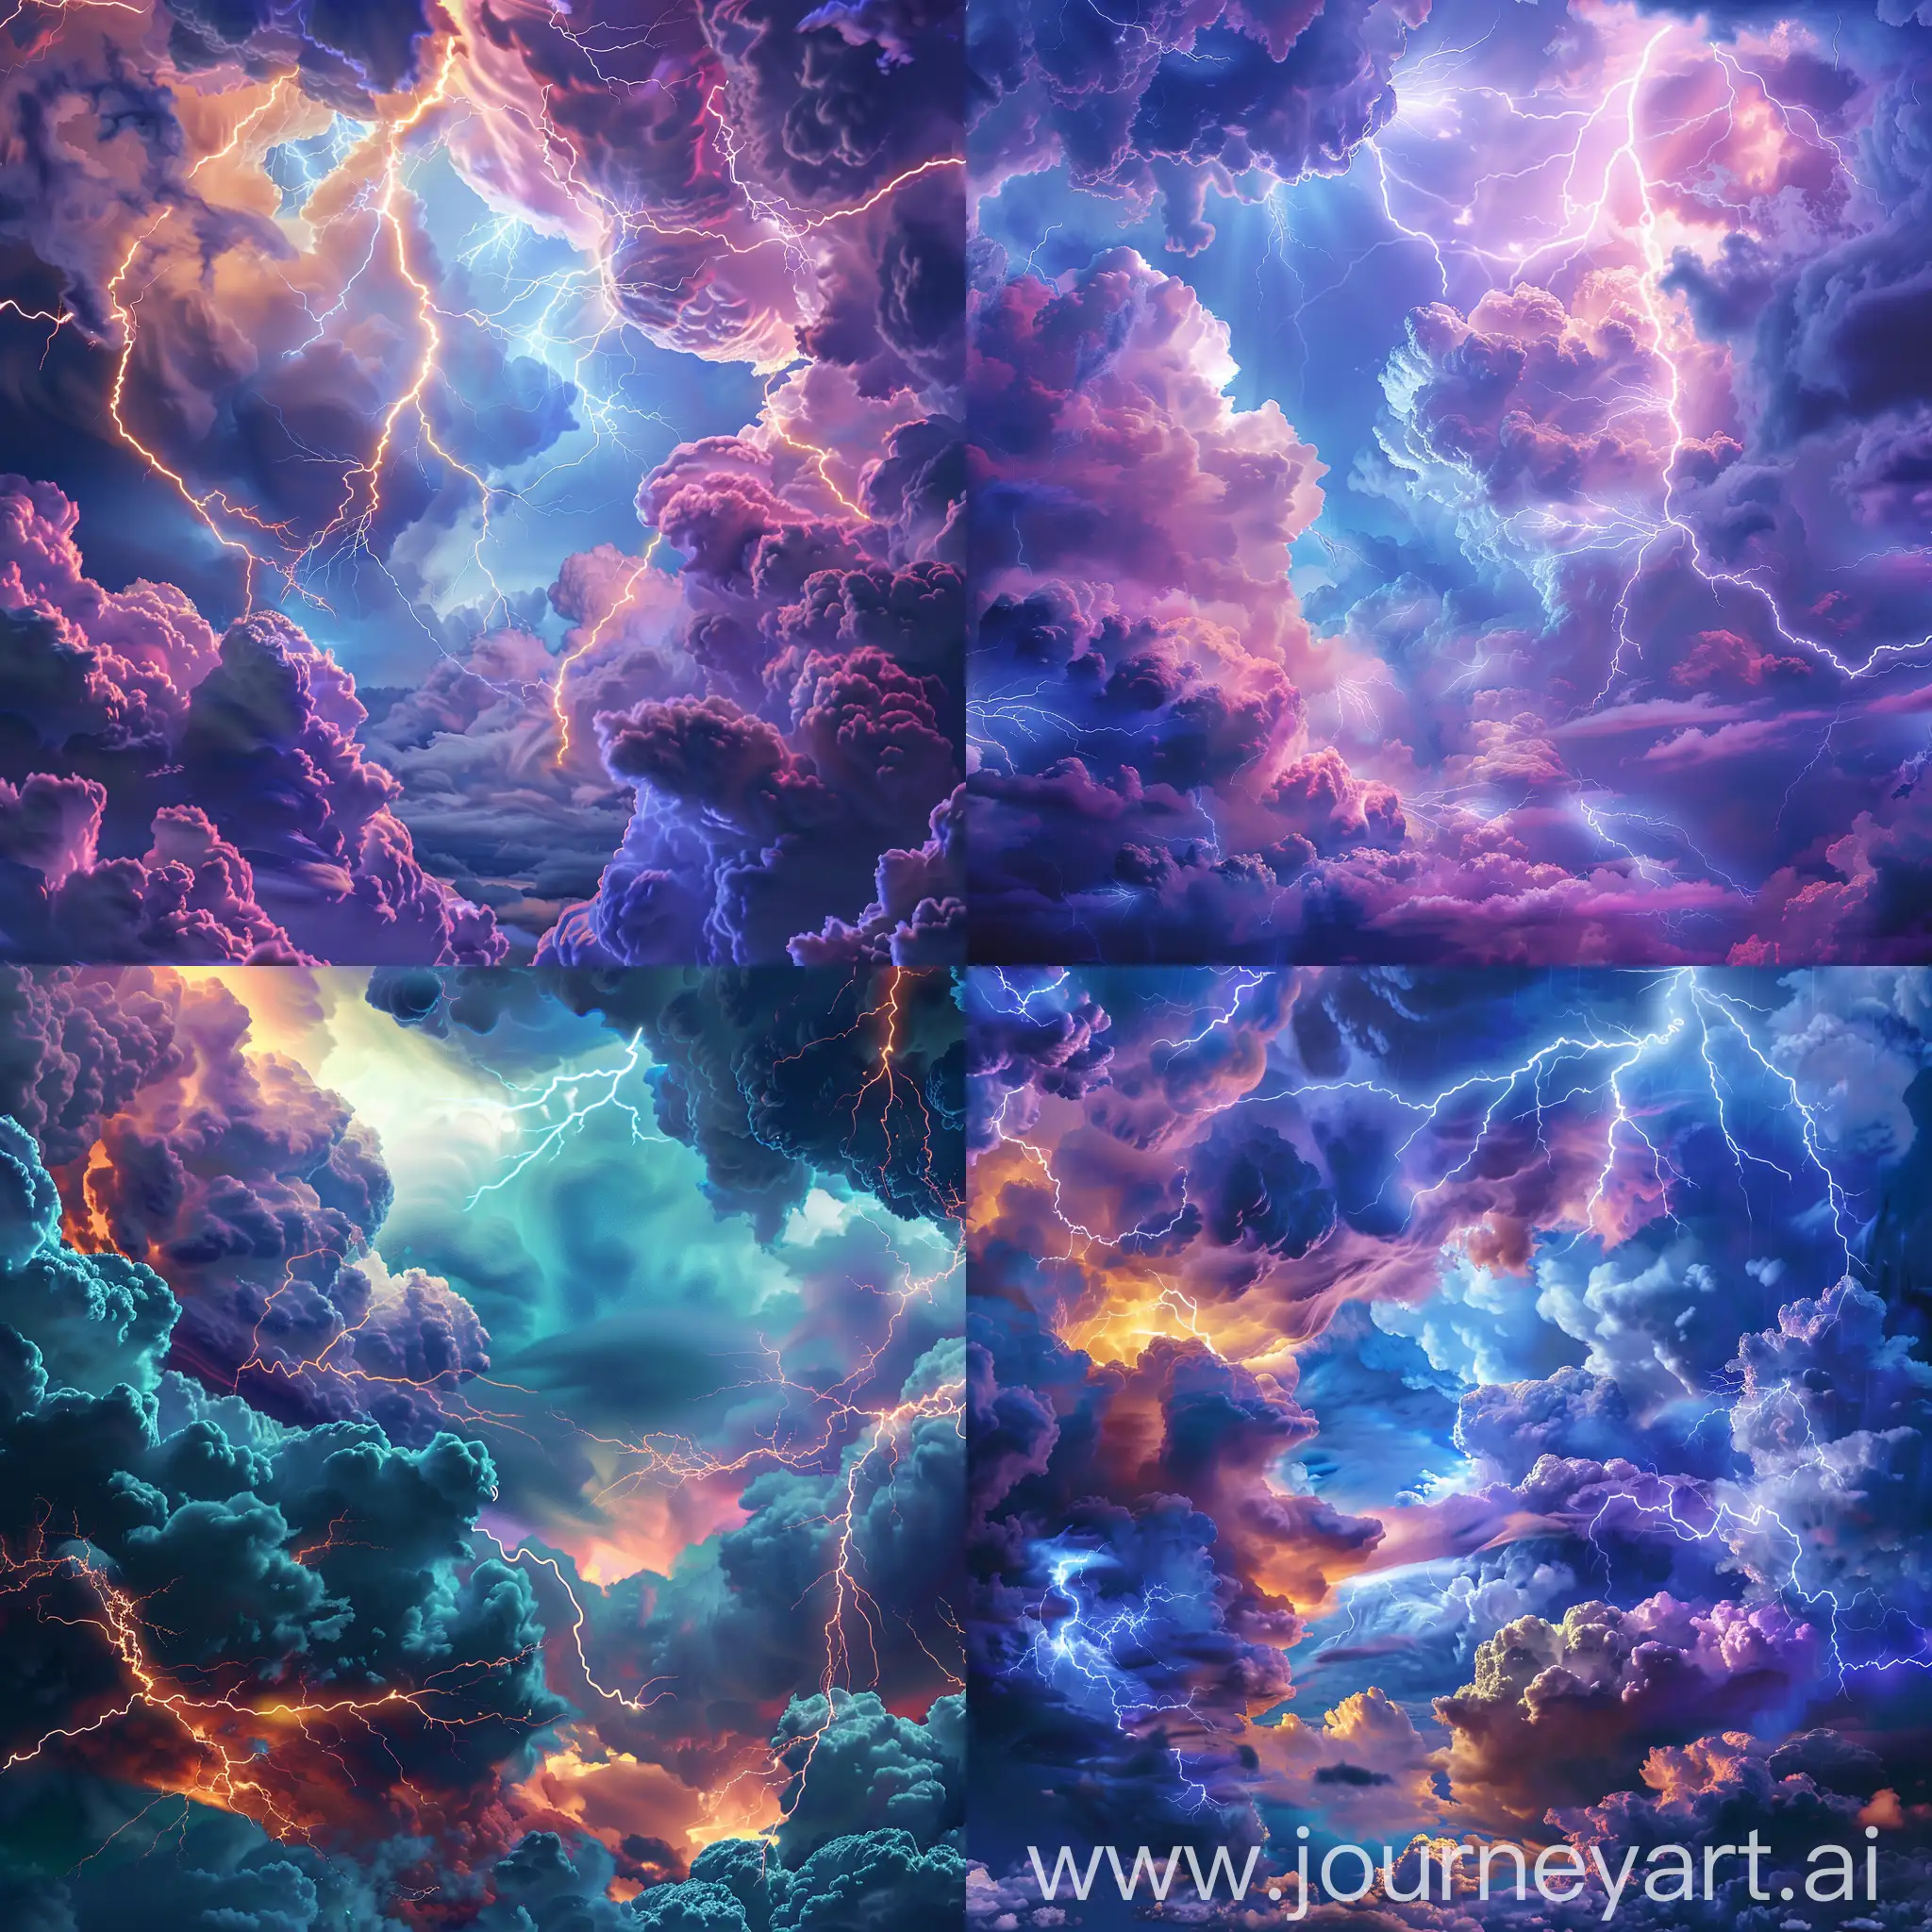 Apocalyptic-Thunderstorm-Sky-HighQuality-CG-with-UltraHigh-Details